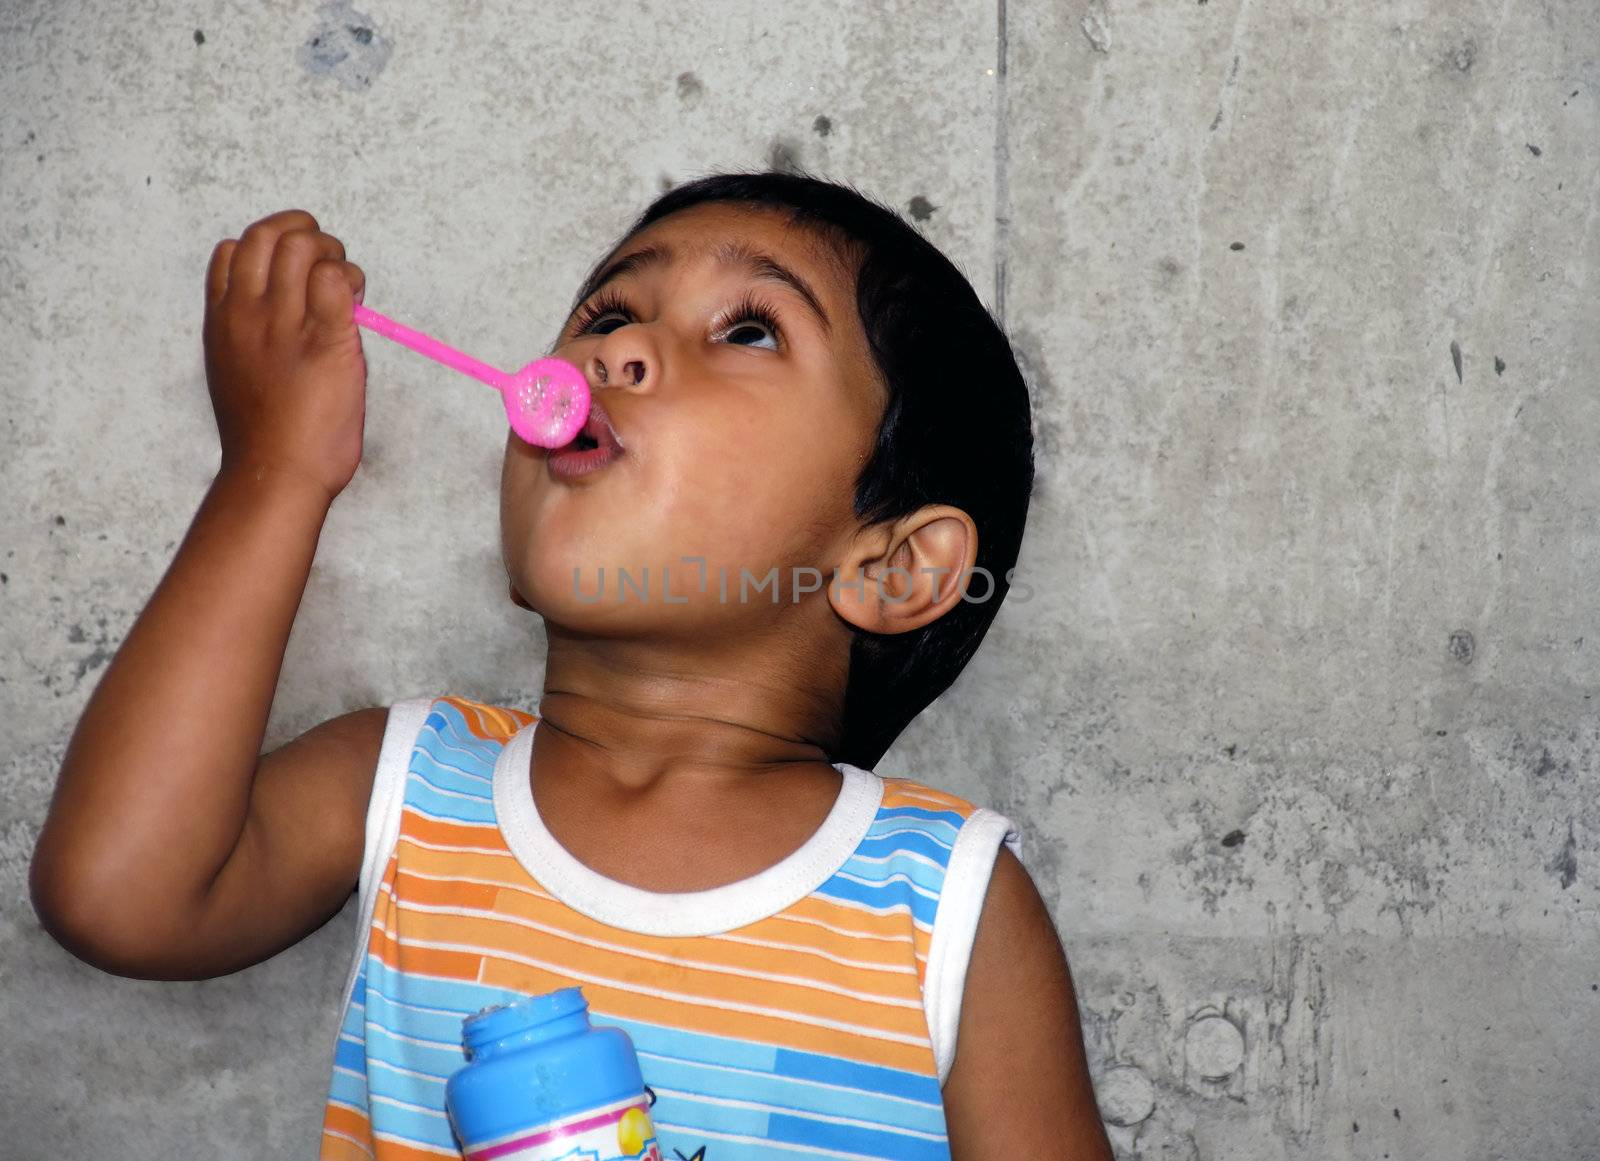 Young Indian kid having fun blowing bubbles